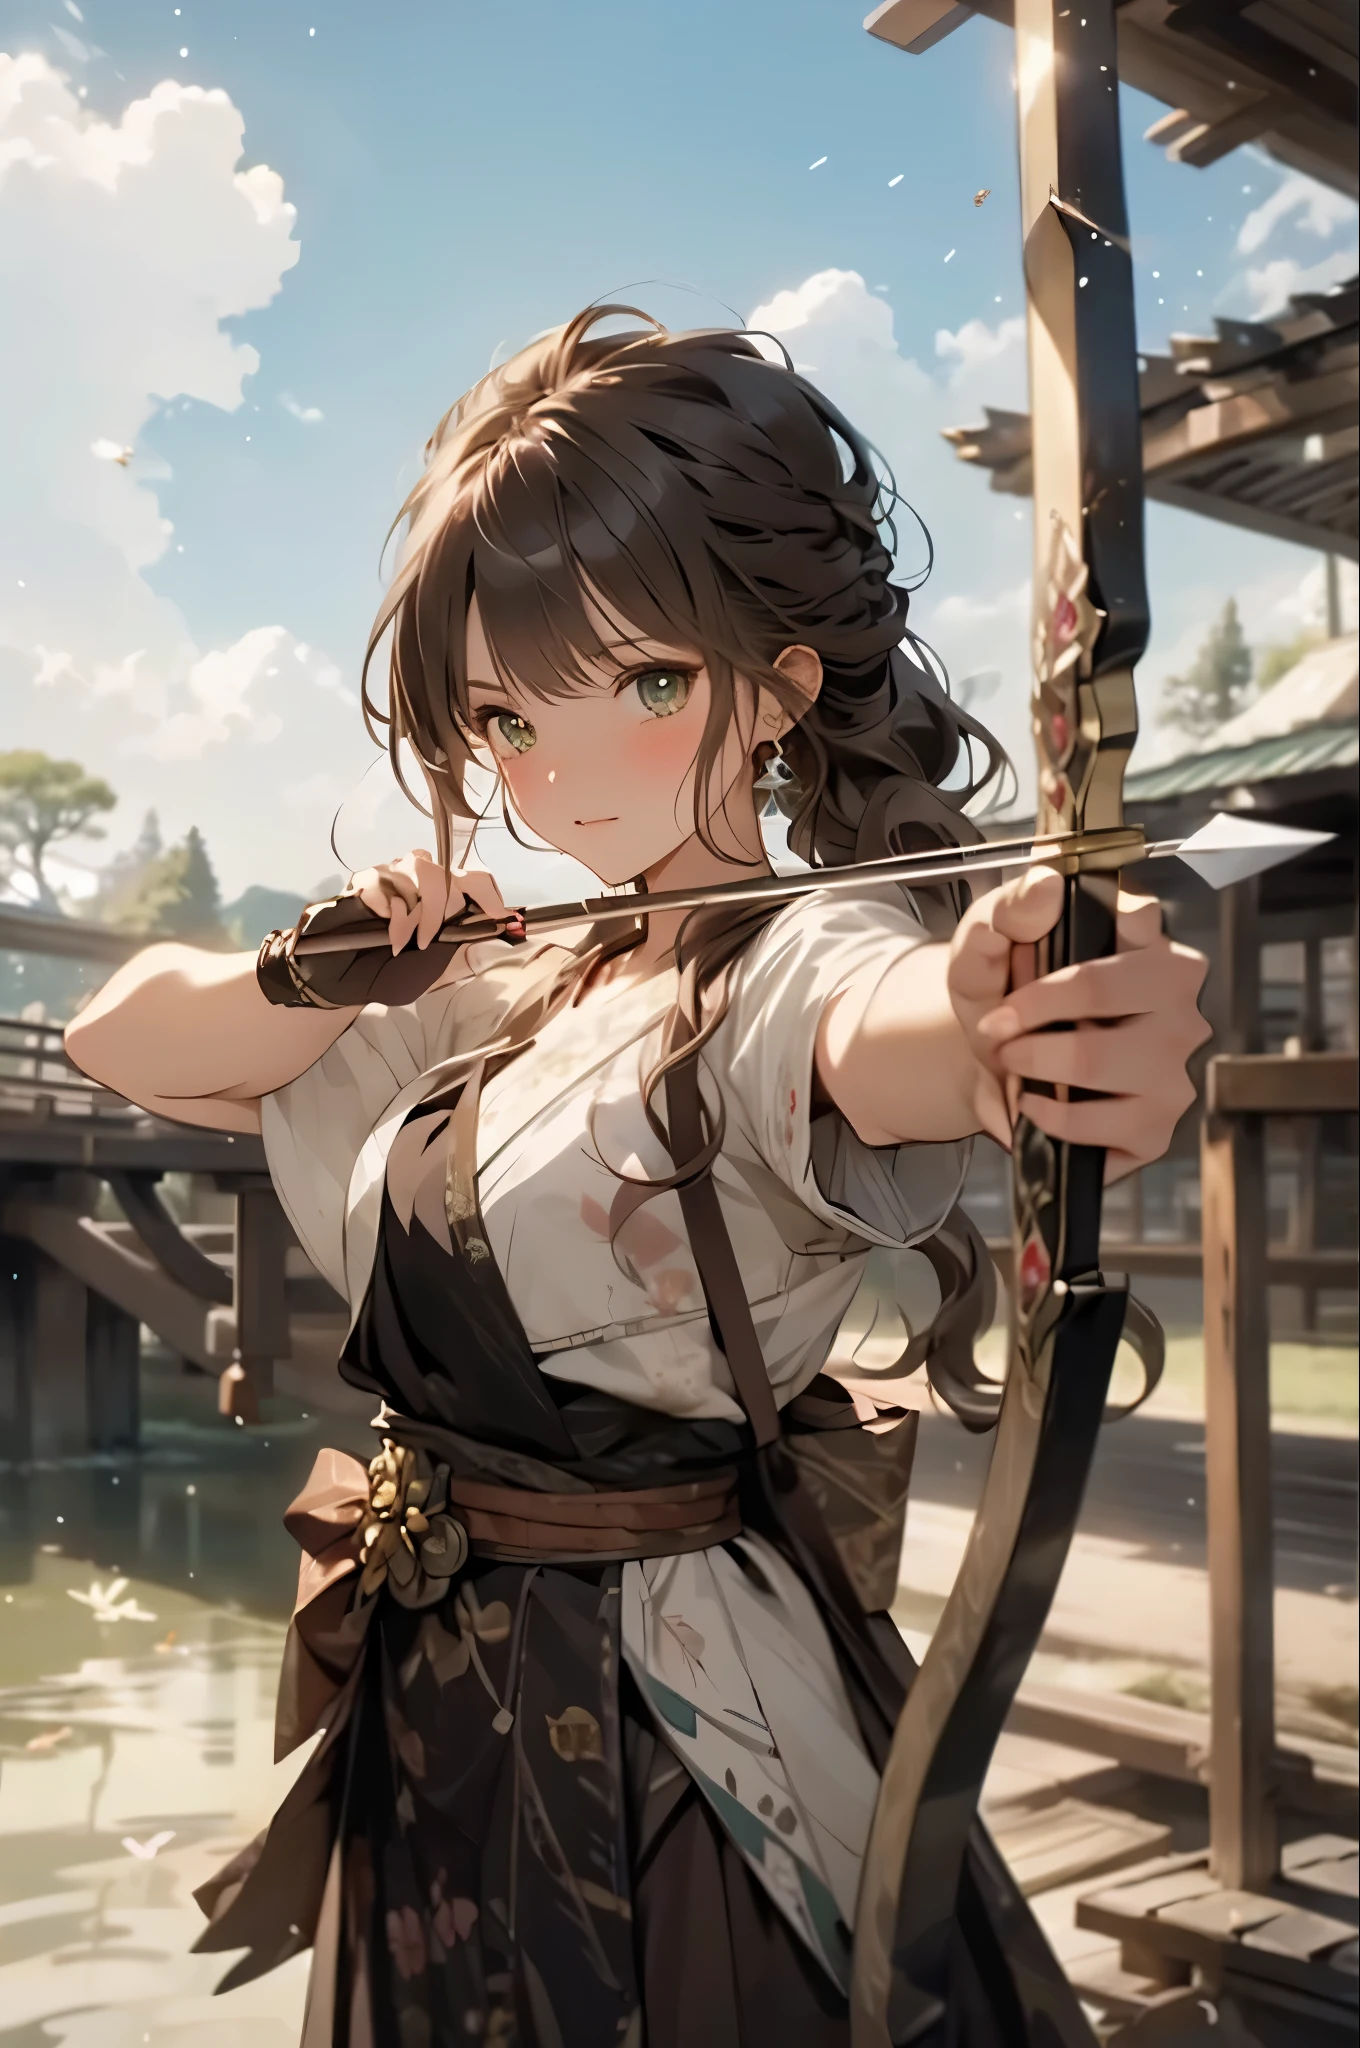 (masterpiece, best quality: 1.2), 1girl, solo, anime art, (straight on view) FACE FOCUS, best quality, ultra-detailed illustration of a woman drawing bow with magical arrow, beautiful detailed eyes in a fantasy forest, silver hair, wearing detiled green and brown ranger outfit, very_rich_many_wavy_hair, looking at camera, close-up face, (((blushed in surprise face))), gorgeous lovely character, sakura trees, moonlight s, sakura flowers, flying flowers, river, bridge, night clouds, starry sky, windy, rustling leaves, anime style